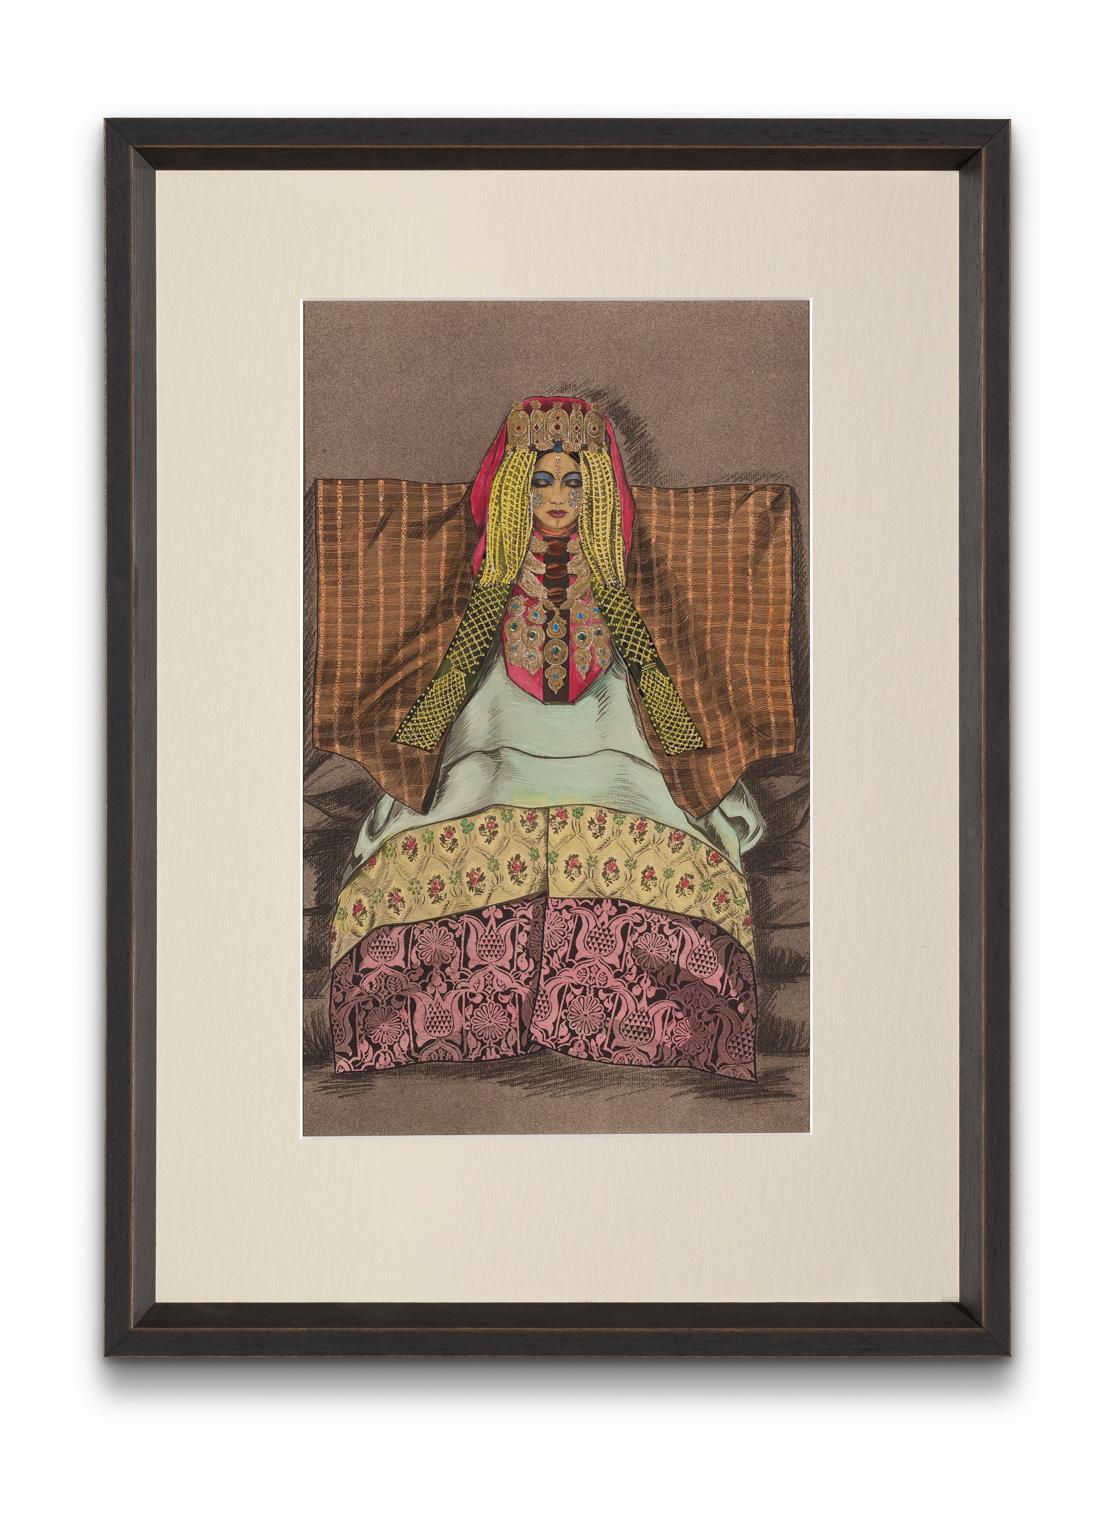 "Woman of the Imerrhane" from "Costumes of Morocco", Gouache on Paper